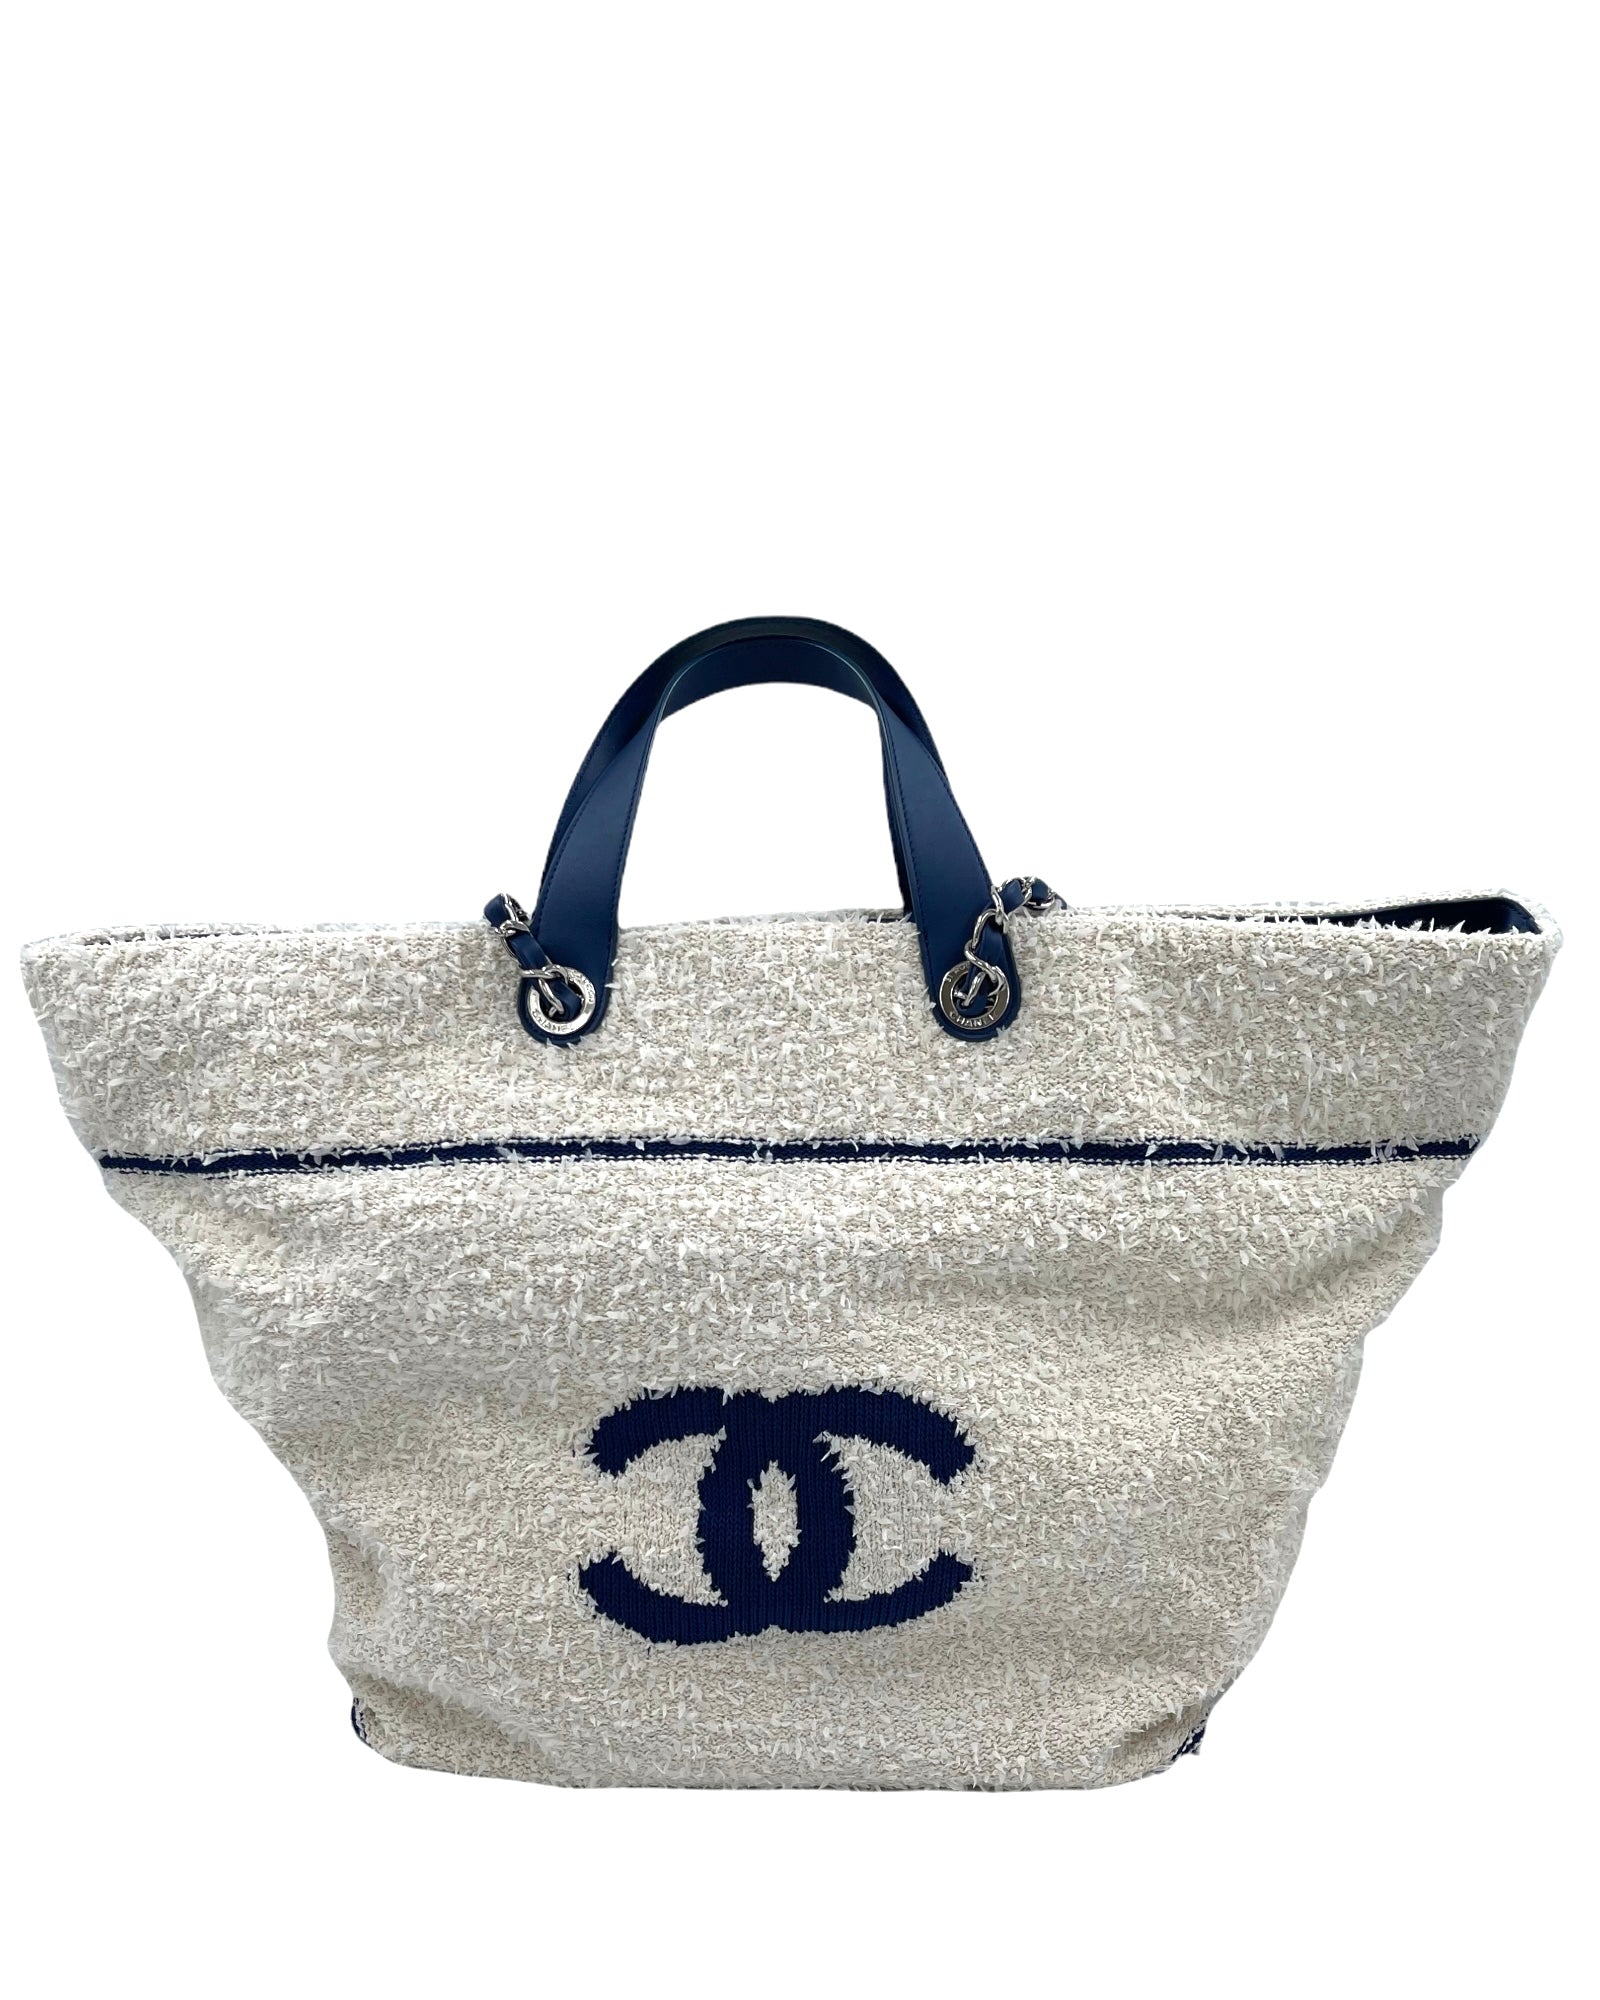 CHANEL Venise Biarritz Shopping Tote Terry Cloth Blue & White Large